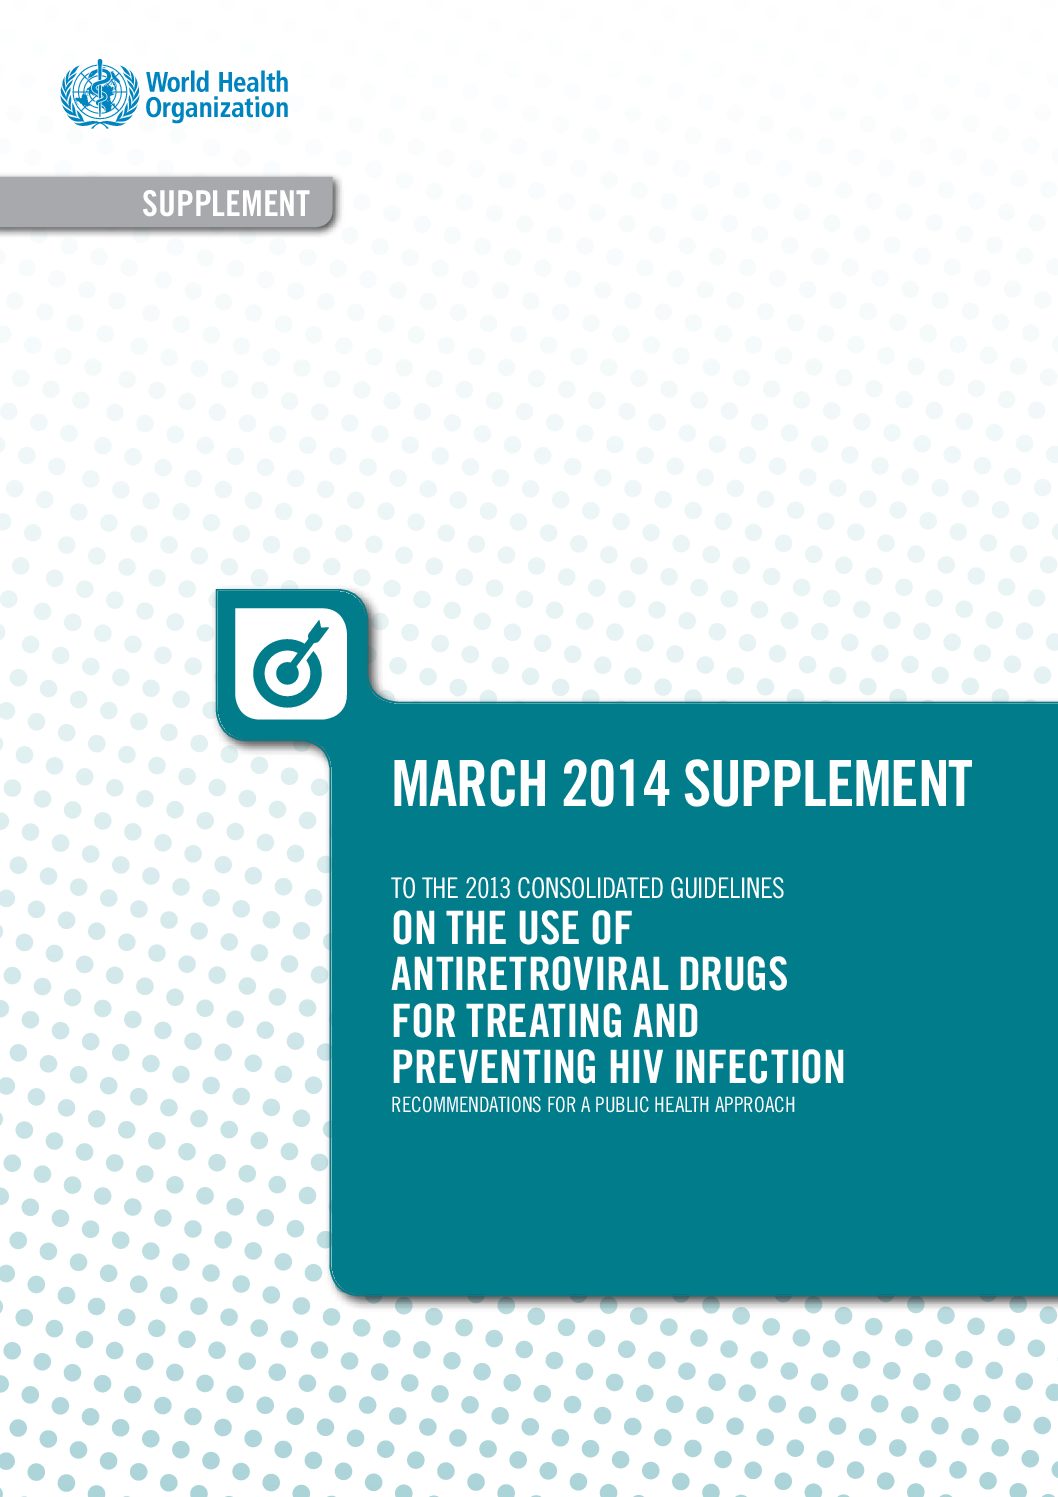 Supplement to the 2013 consolidated guidelines on the use of antiretroviral drugs for treating and preventing HIV infection recommendations for a public health approach.